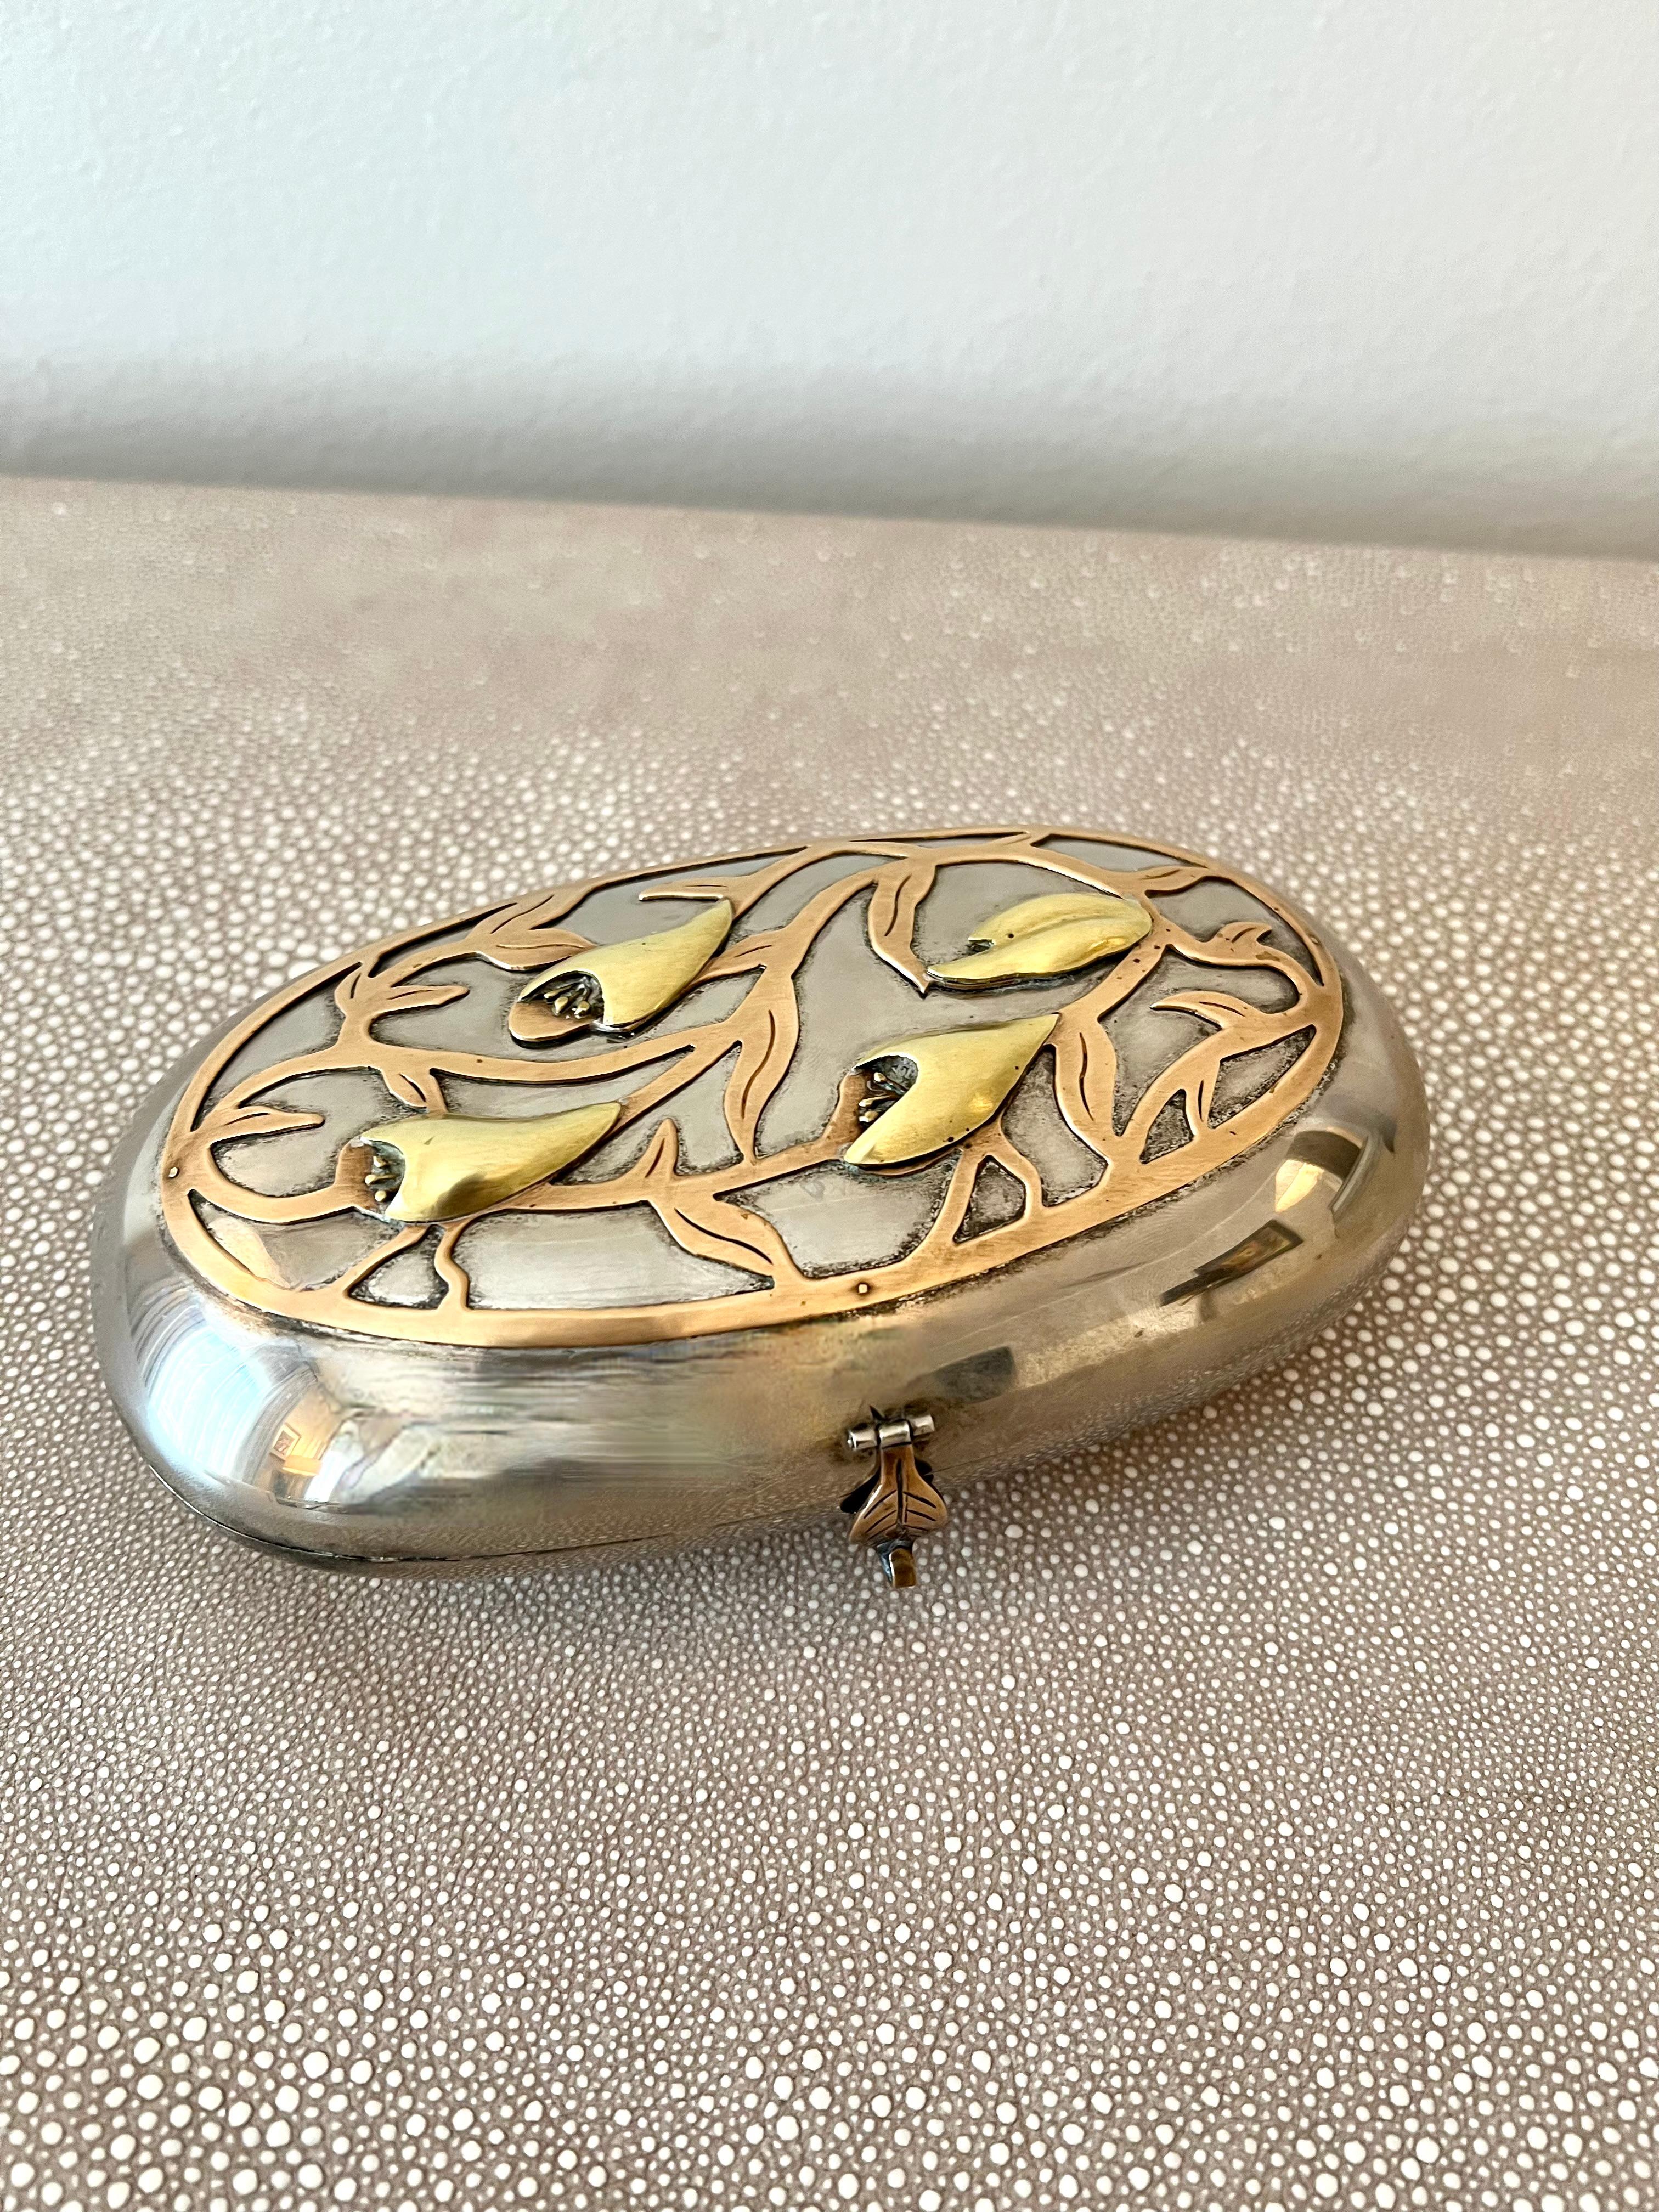 Shining art nouveau decorative box with floral detail and charming patination. 

A handmade intricate design of brass tulip-style flowers and their leaves decorates the top of this box. A brass leaf serves as the clasp-style closure to the black